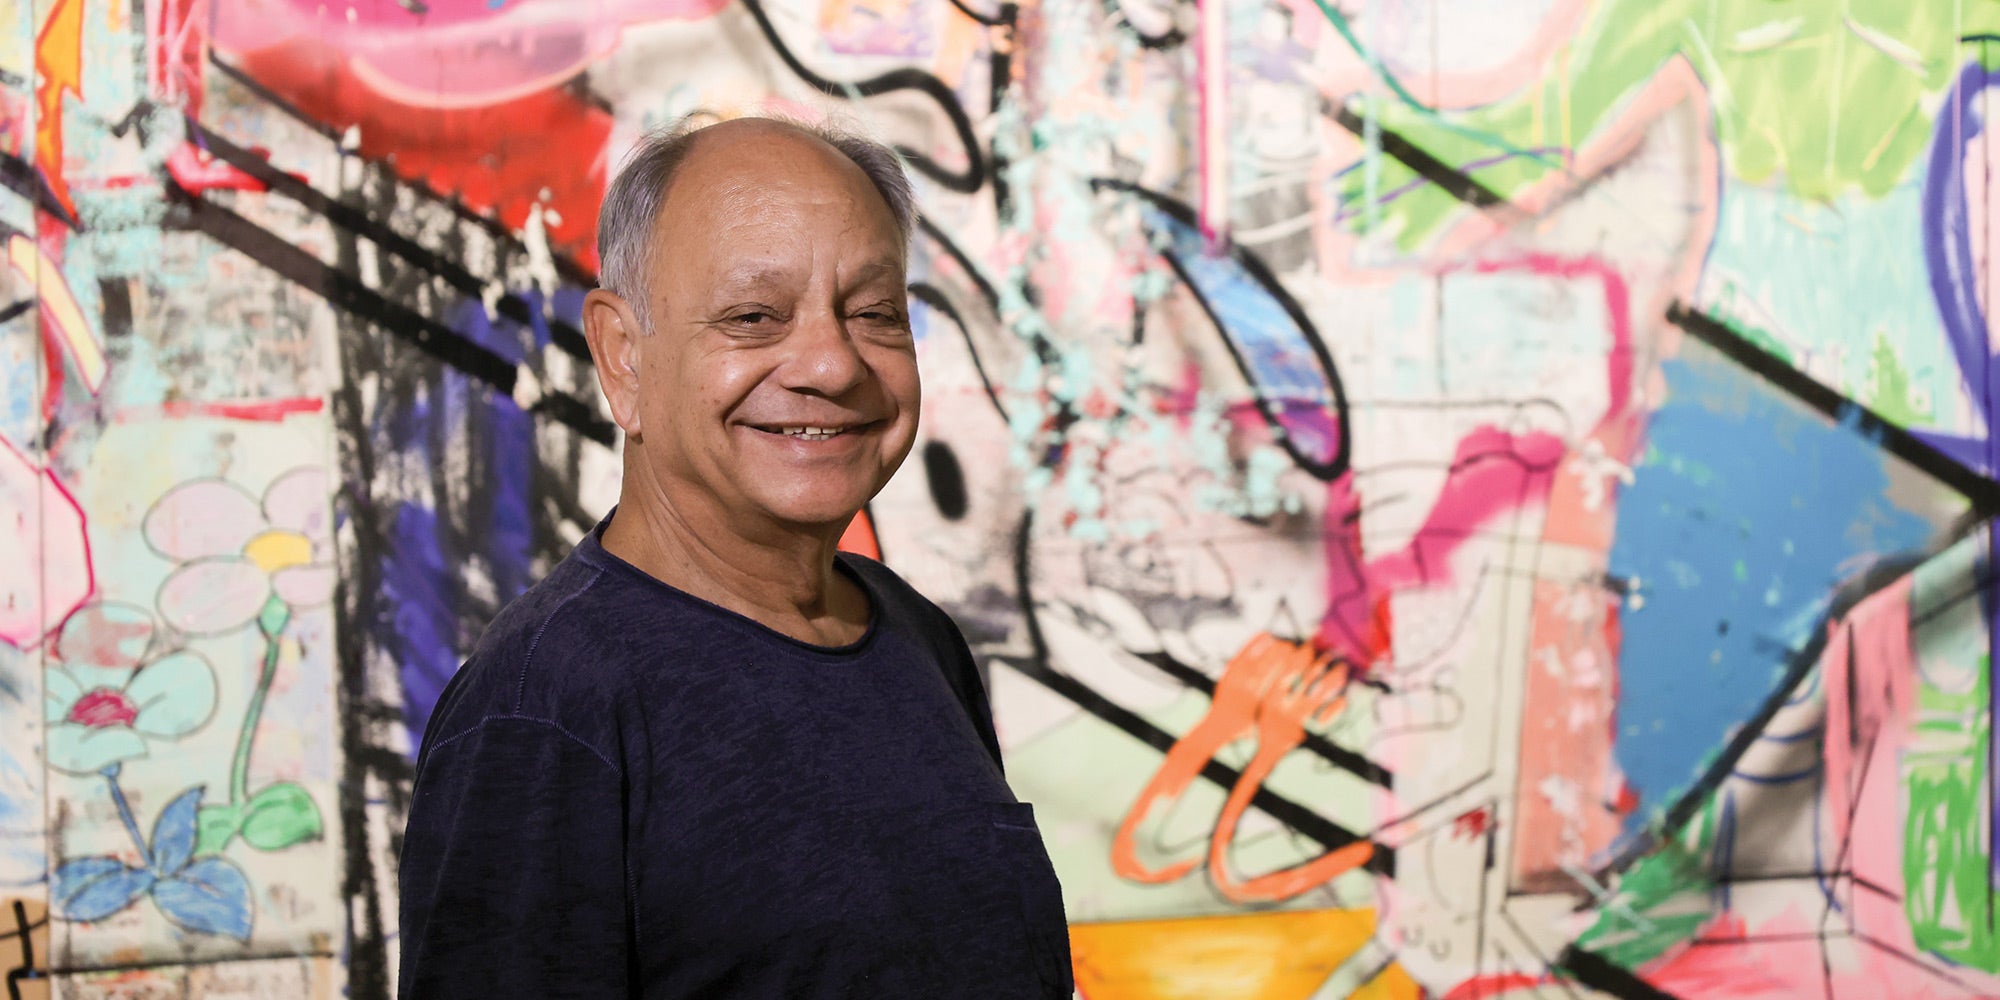 Cheech Marin in front of artwork by Cande Aguilar